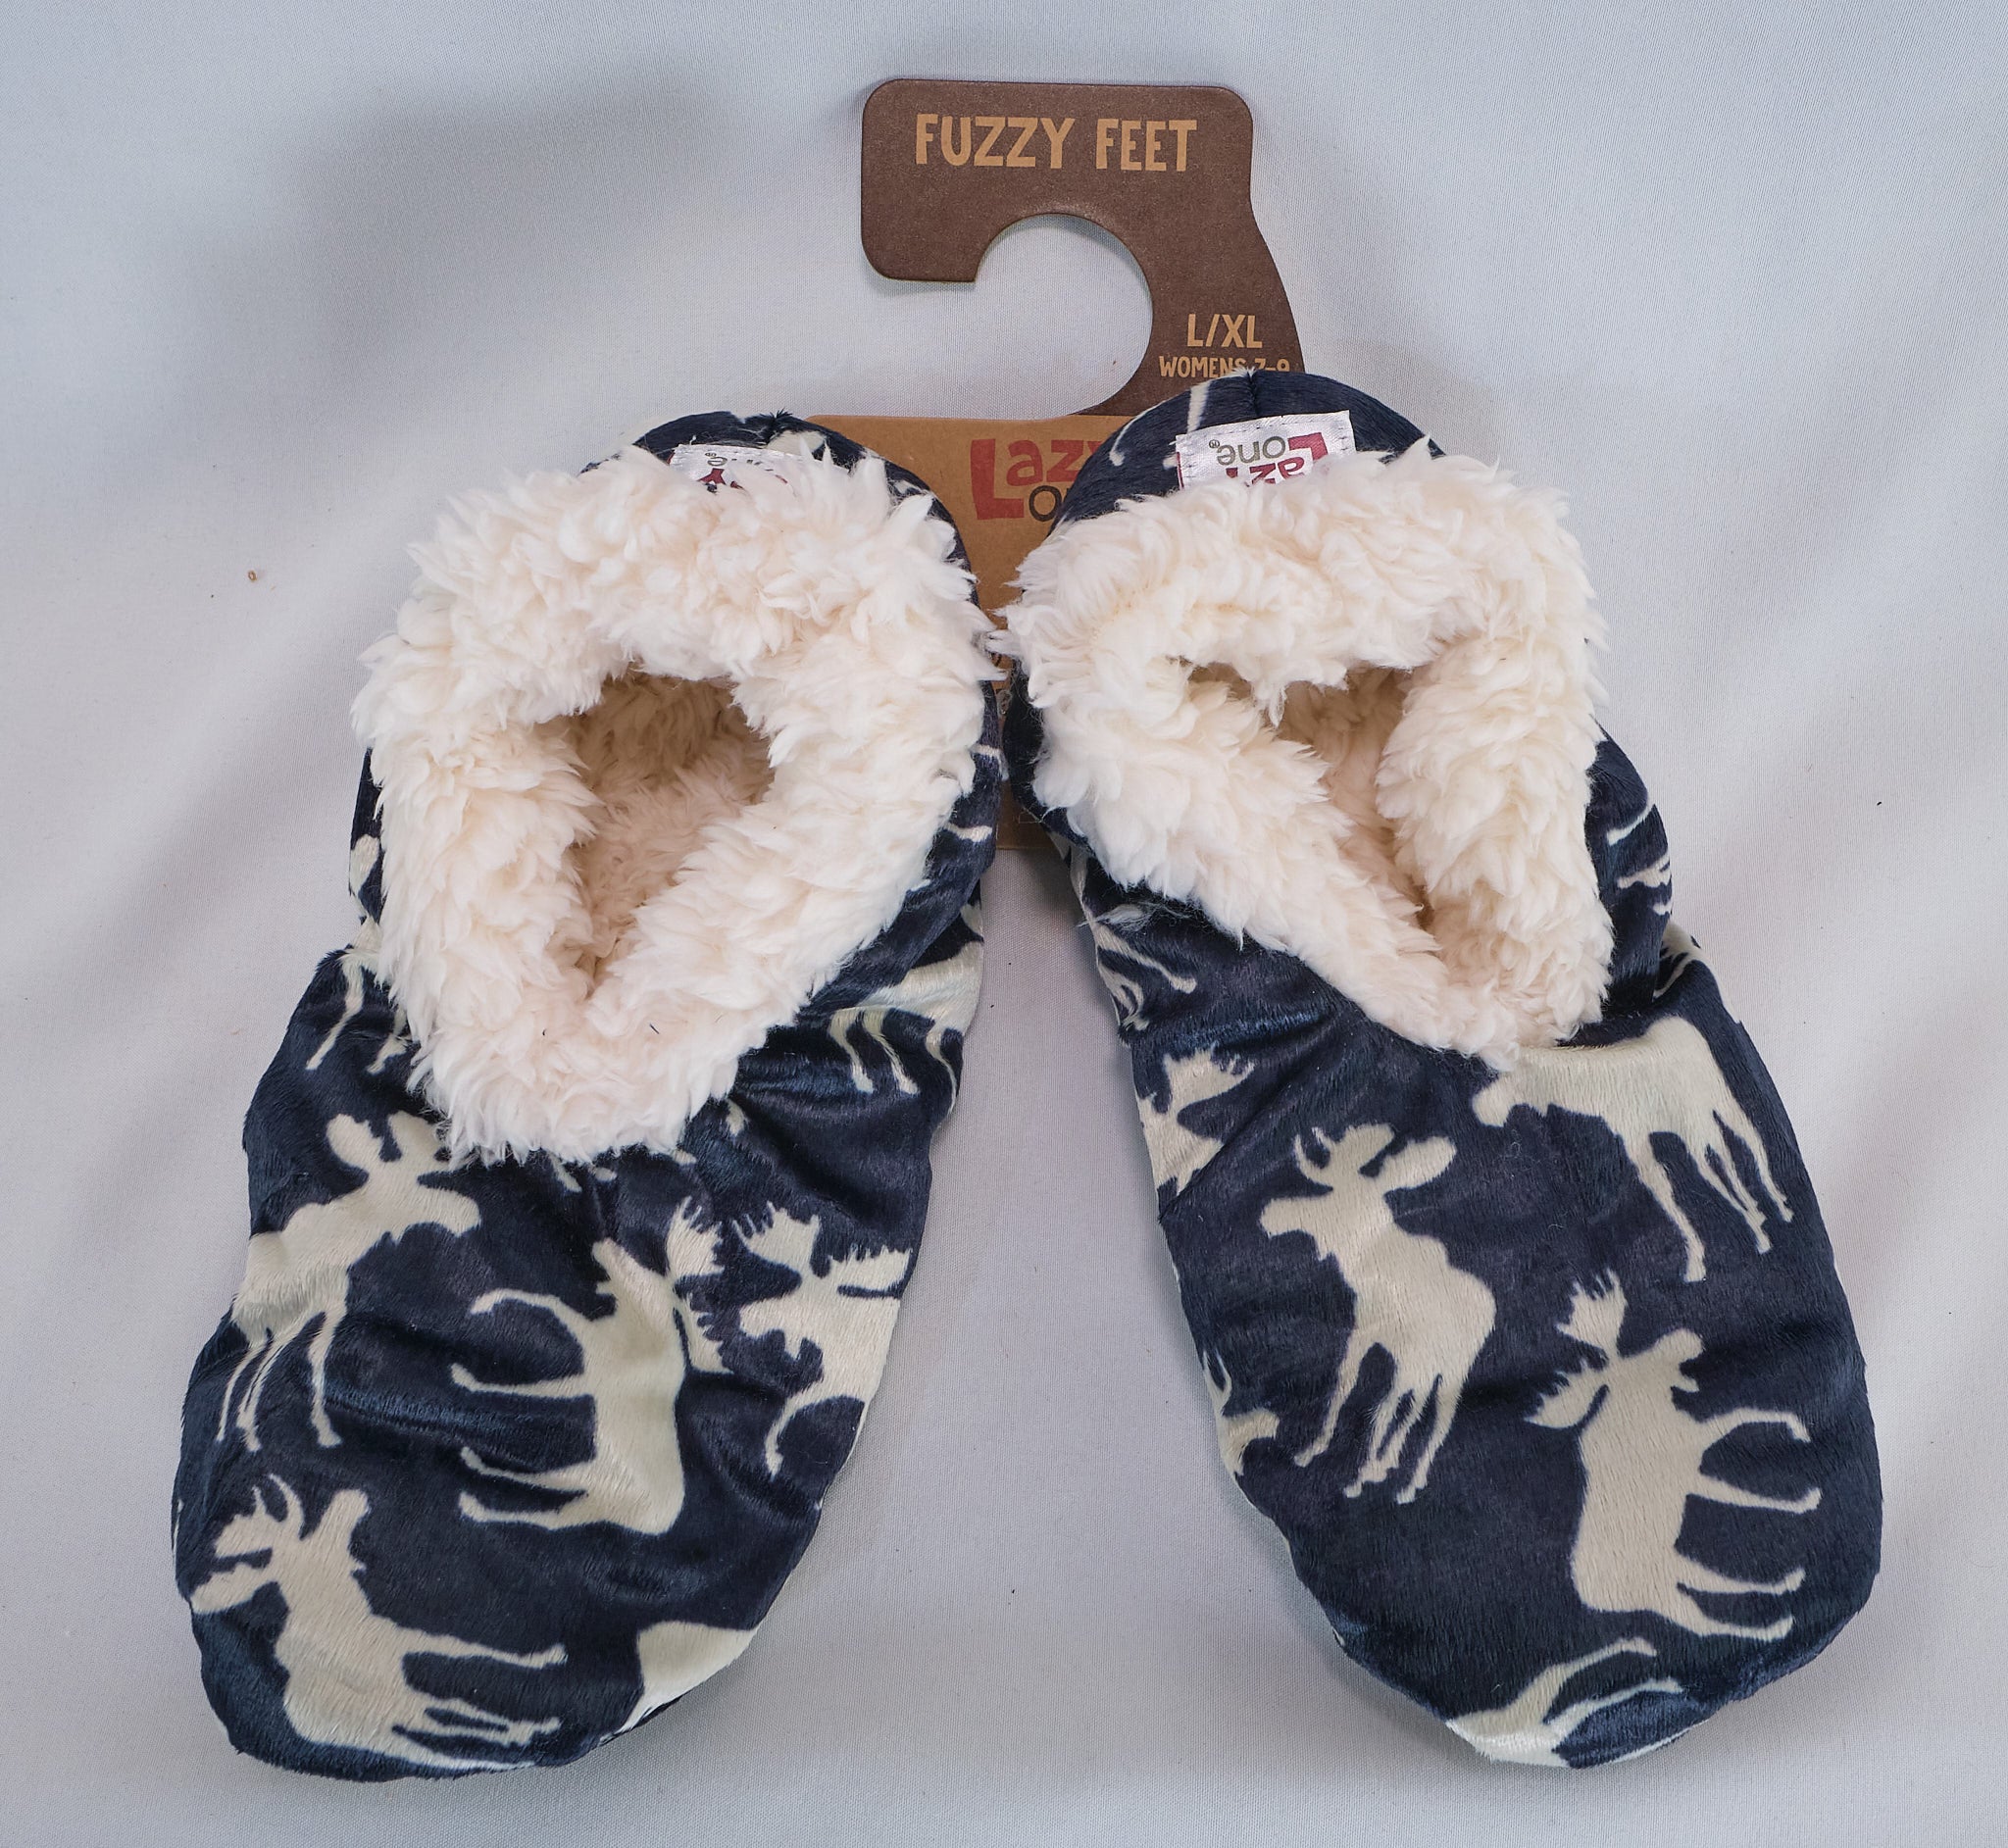 Classic Moose Fuzzy Slippers lg/xl